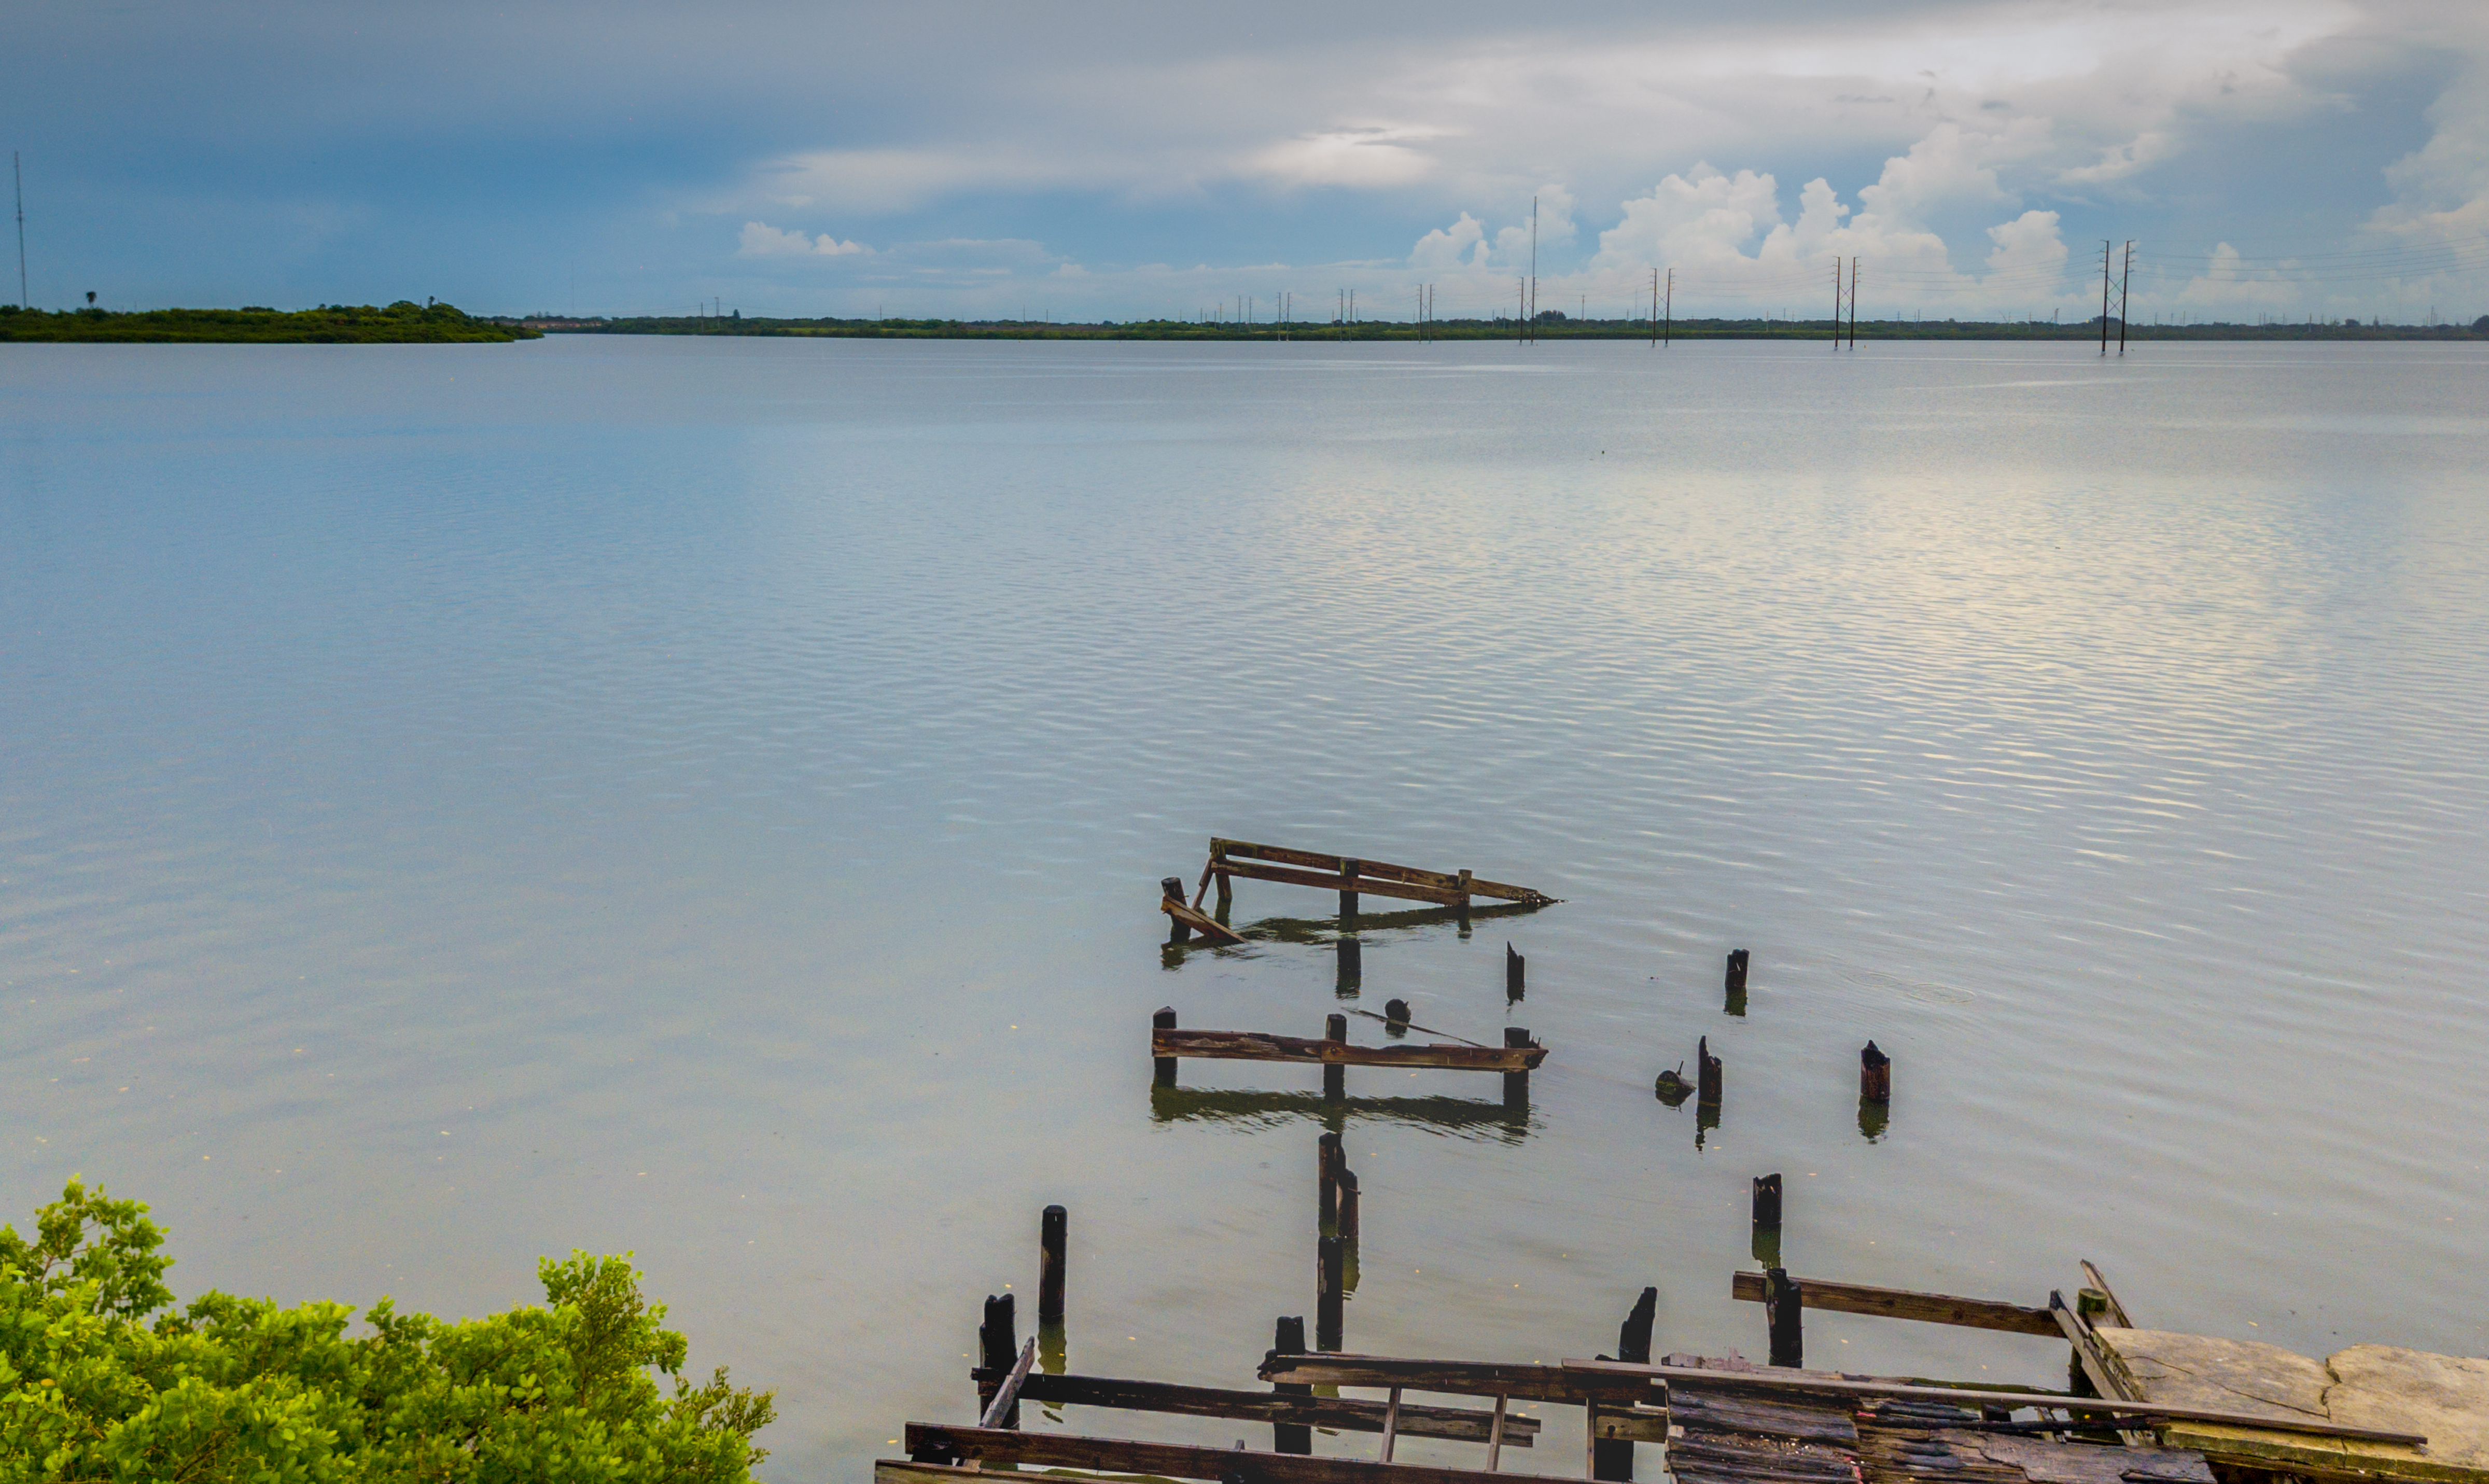 Lonely dock on Tampa bay